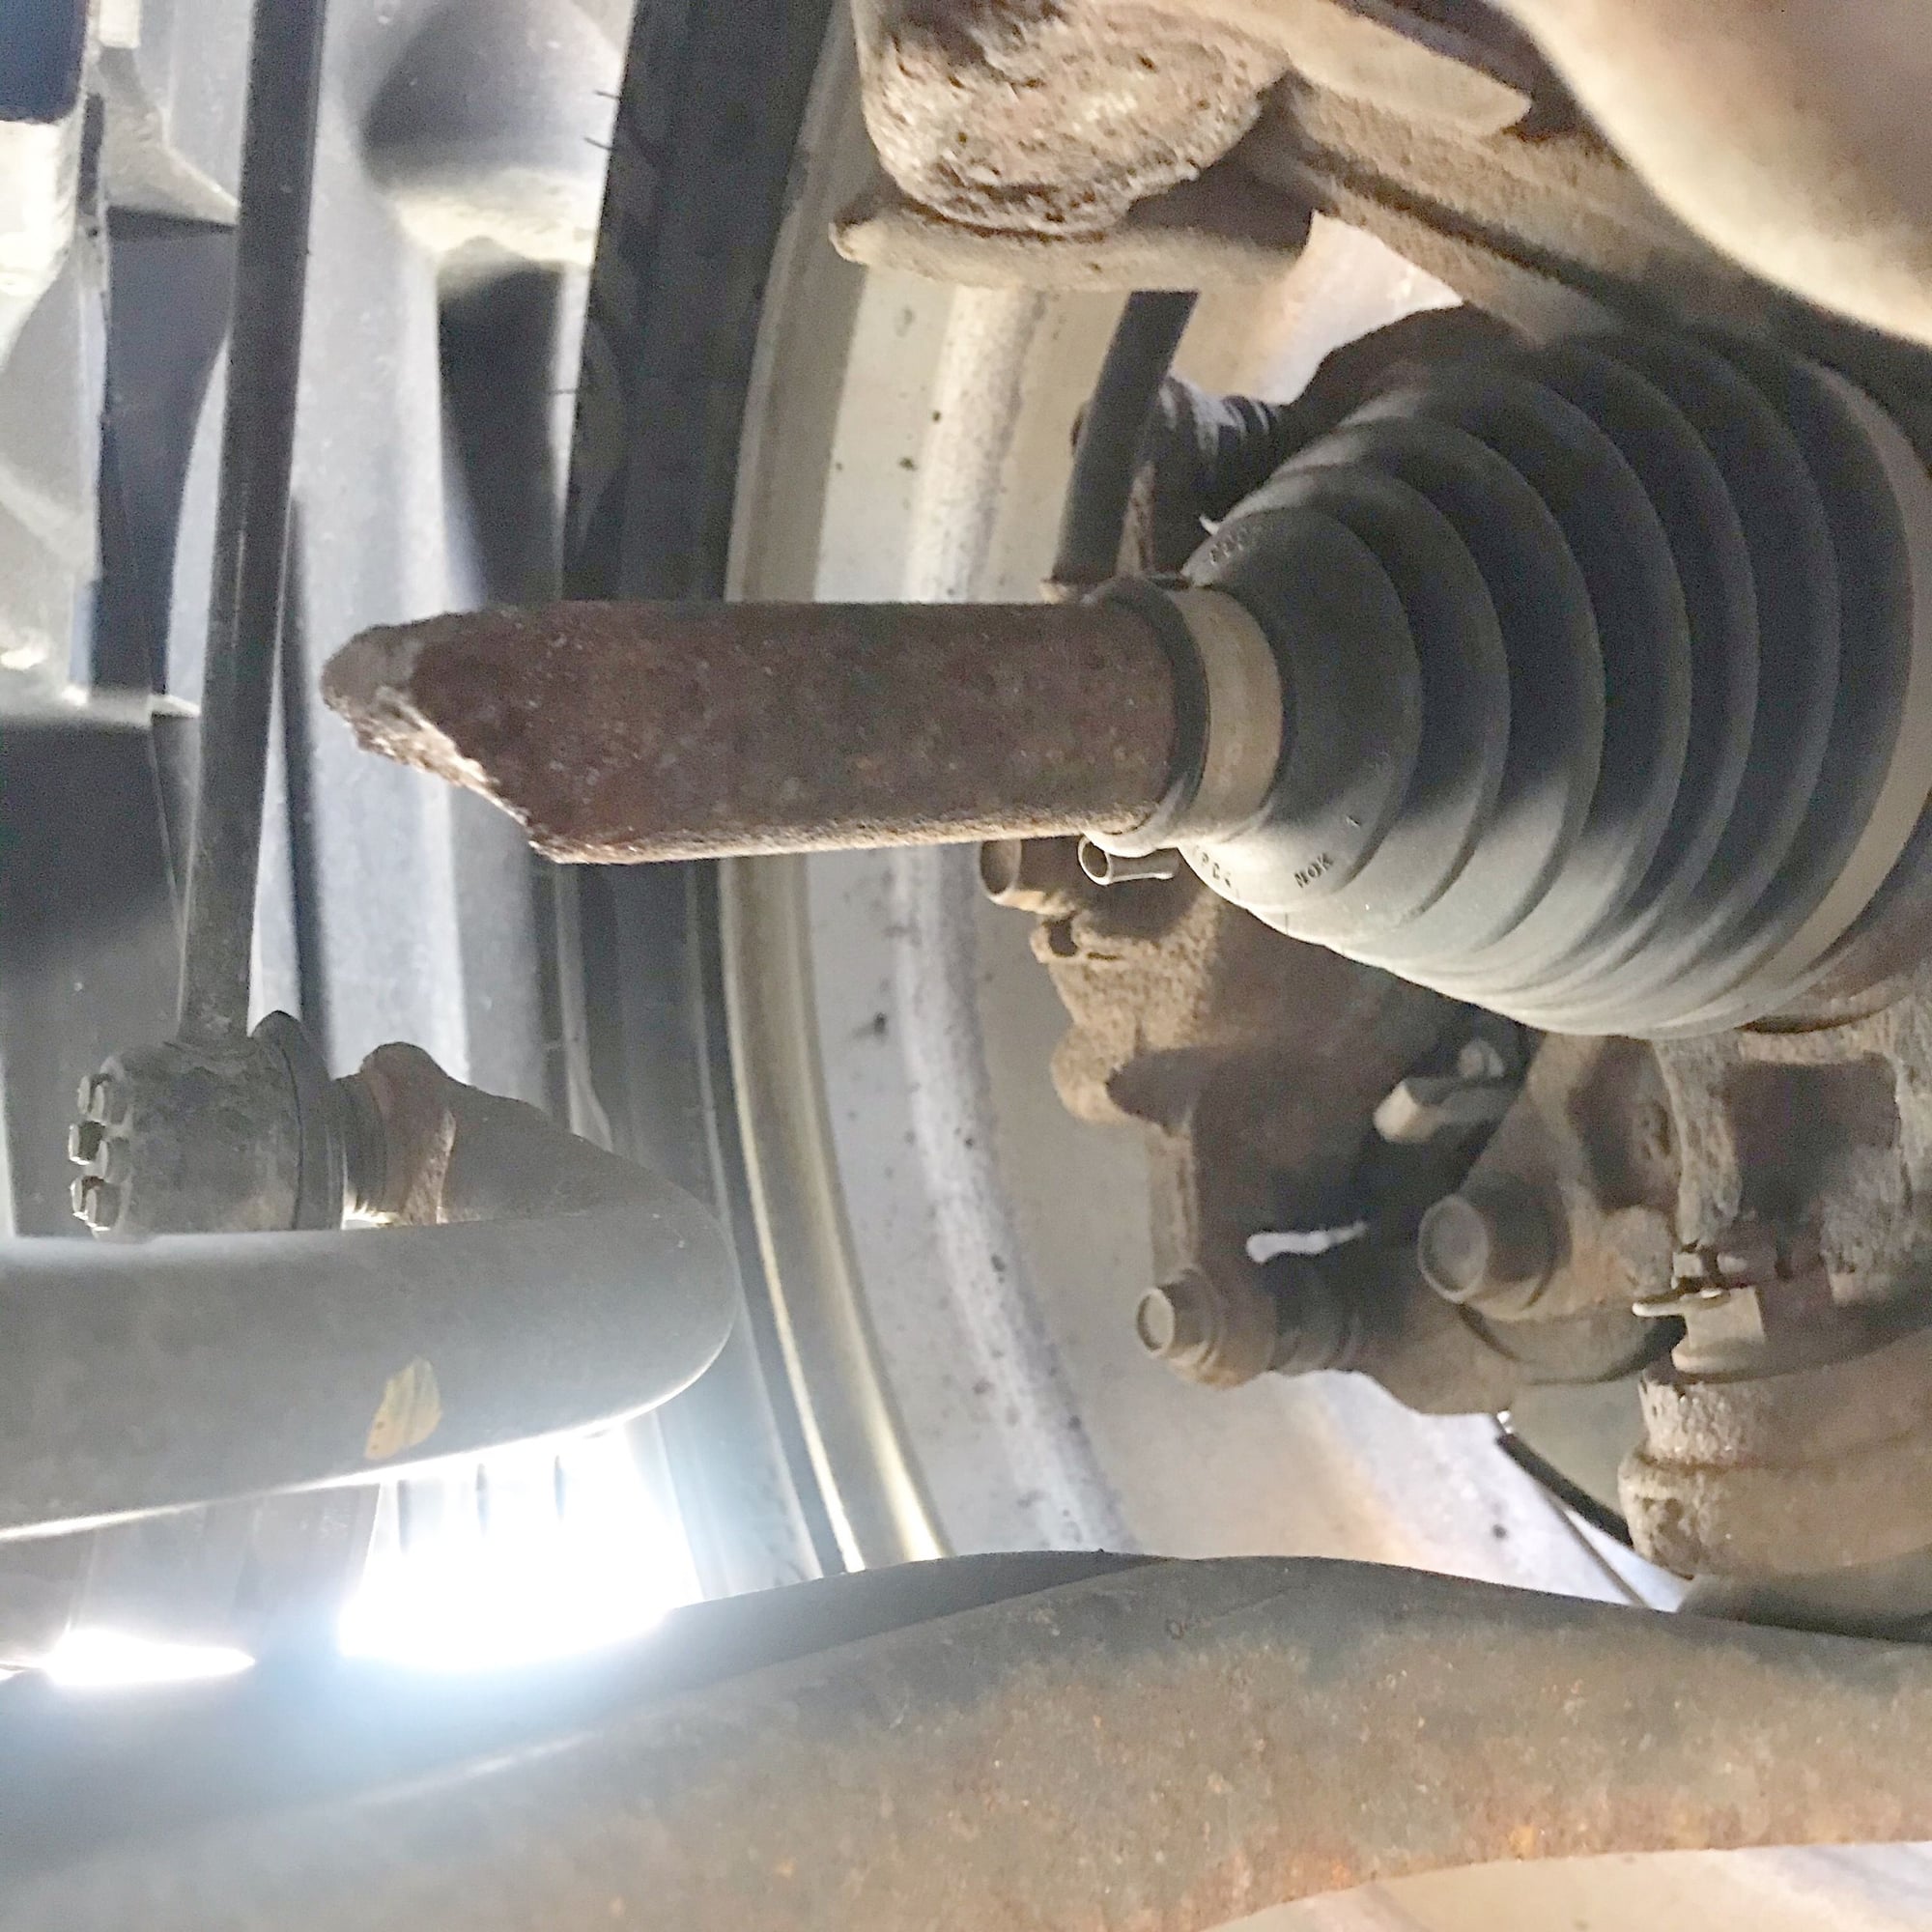 Blew the Clutch and Snapped an Axle! - Unofficial Honda FIT Forums